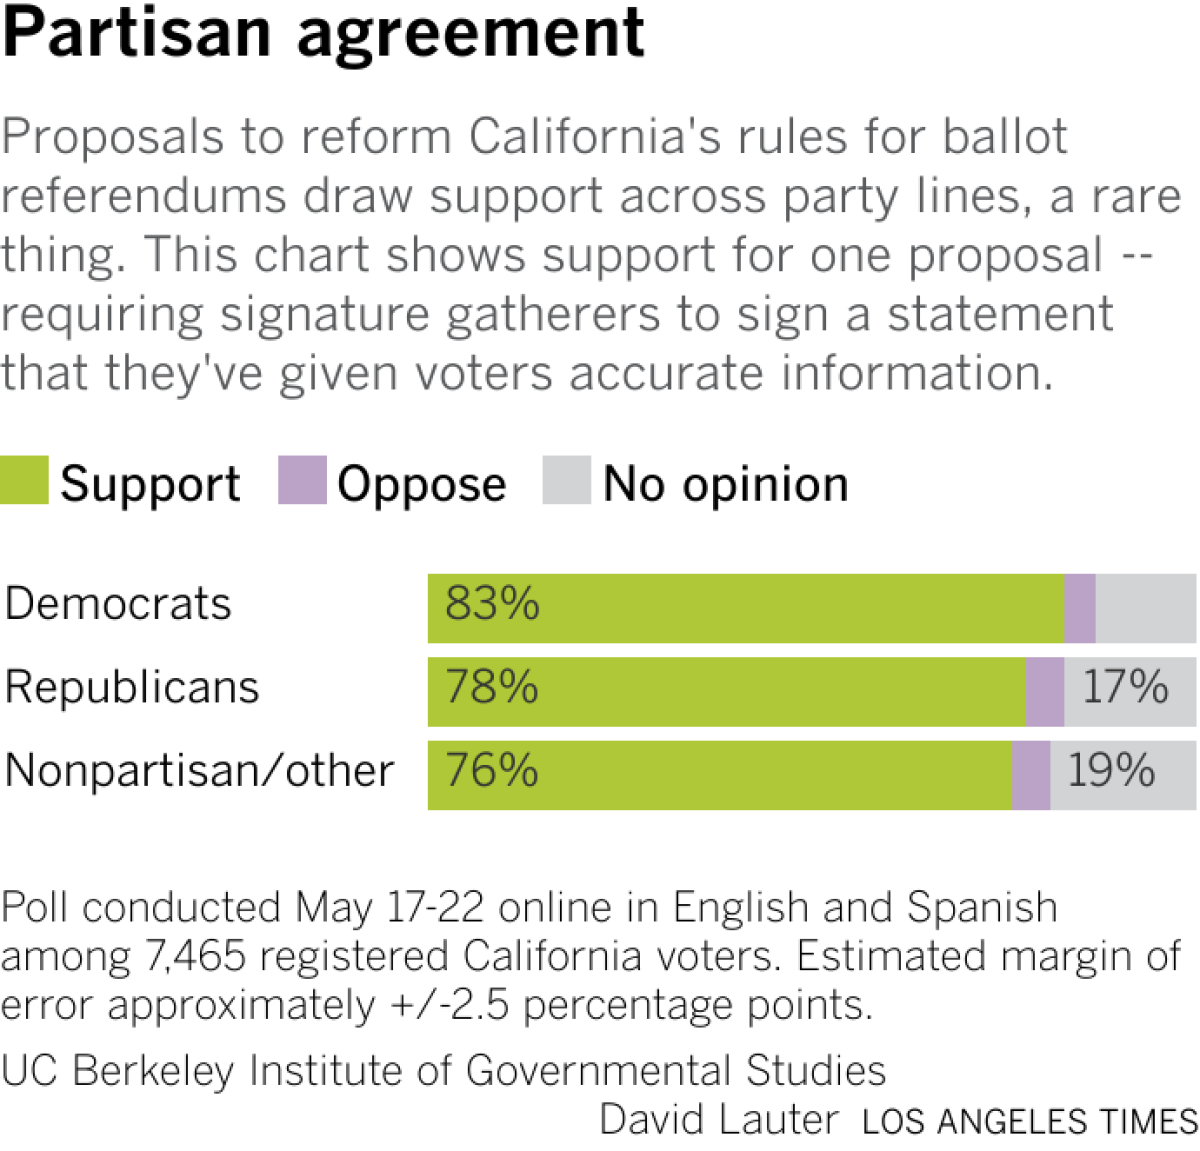 Bars show the share of Democrats, Republicans and nonpartisan or other party voters who support, oppose or don't have a position on a ballot reform proposal.